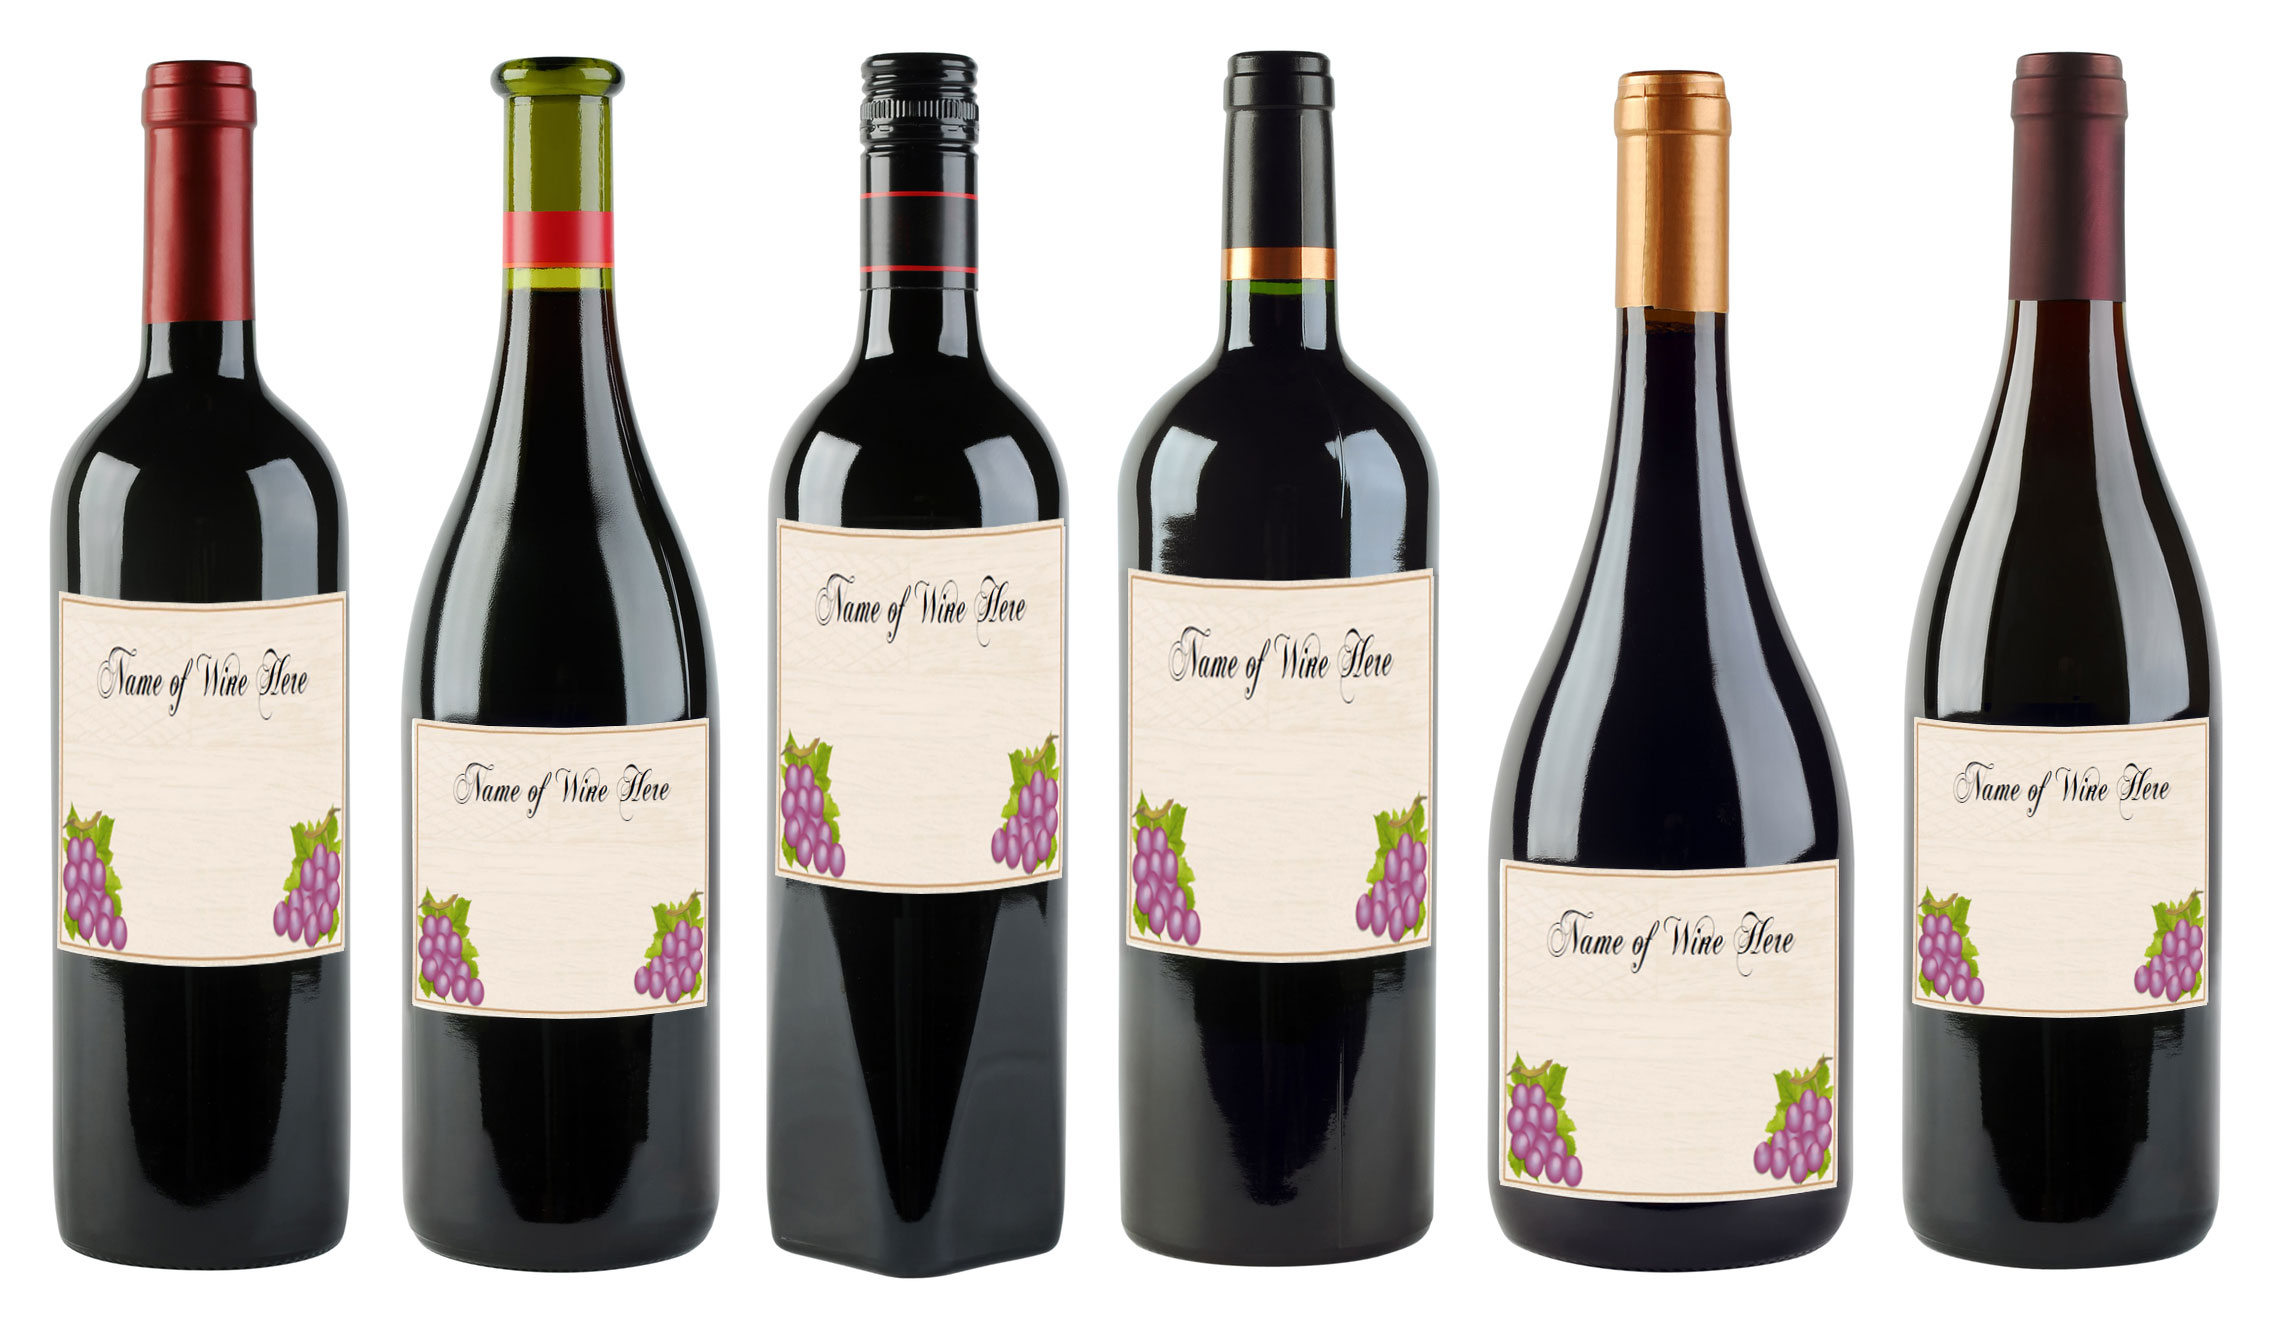 6 Free Printable Wine Labels You Can Customize | Lovetoknow - Free Printable Wine Labels For Birthday